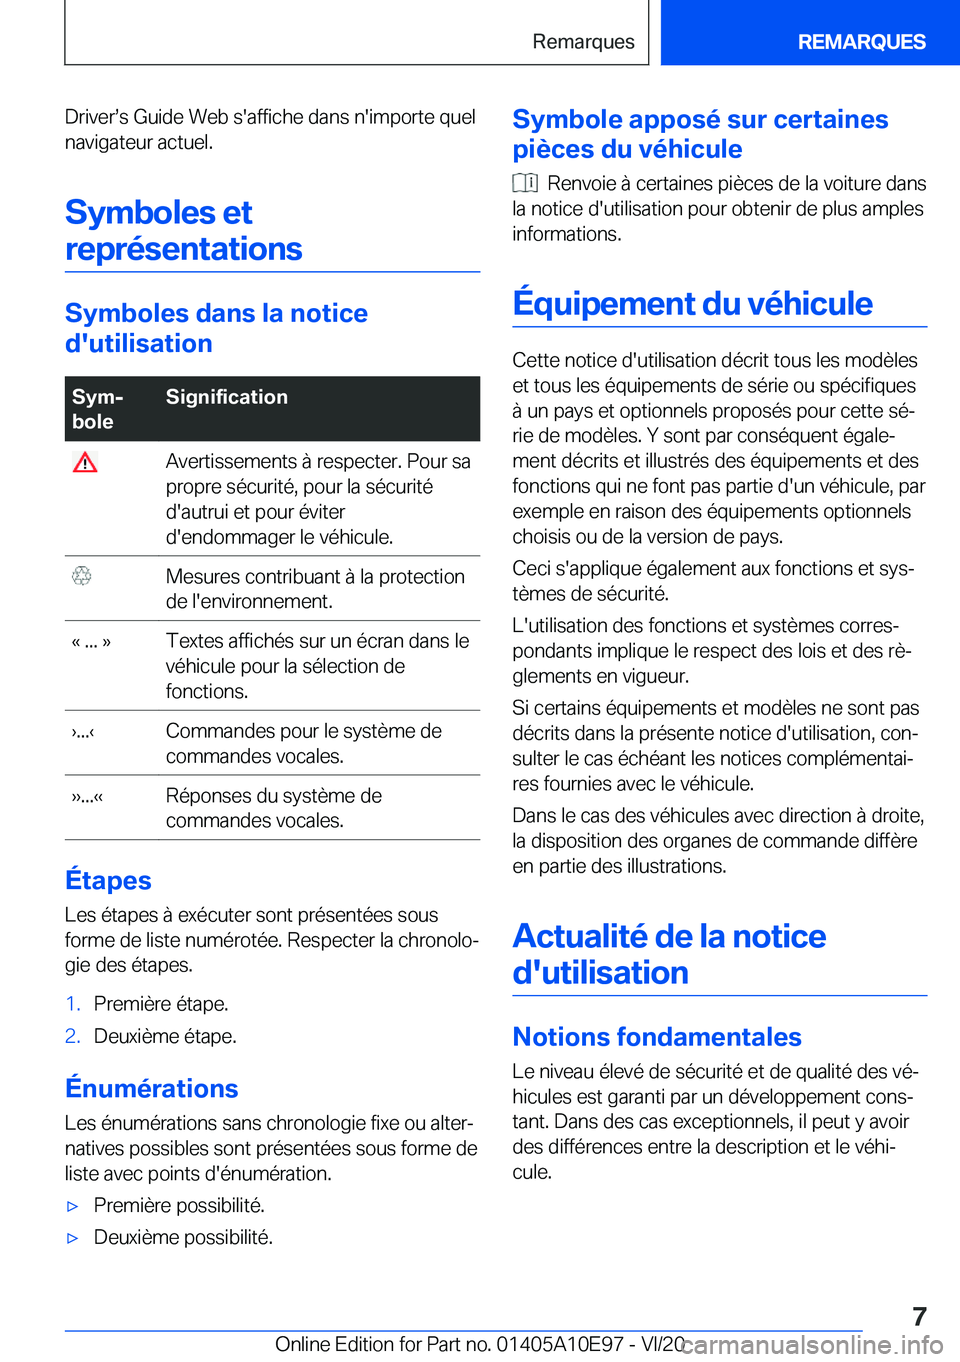 BMW X3 2021  Notices Demploi (in French) �D�r�i�v�e�rs�s��G�u�i�d�e��W�e�b��s�'�a�f�f�i�c�h�e��d�a�n�s��n�'�i�m�p�o�r�t�e��q�u�e�l�n�a�v�i�g�a�t�e�u�r��a�c�t�u�e�l�.
�S�y�m�b�o�l�e�s��e�t�r�e�p�r�é�s�e�n�t�a�t�i�o�n�s
�S�y�